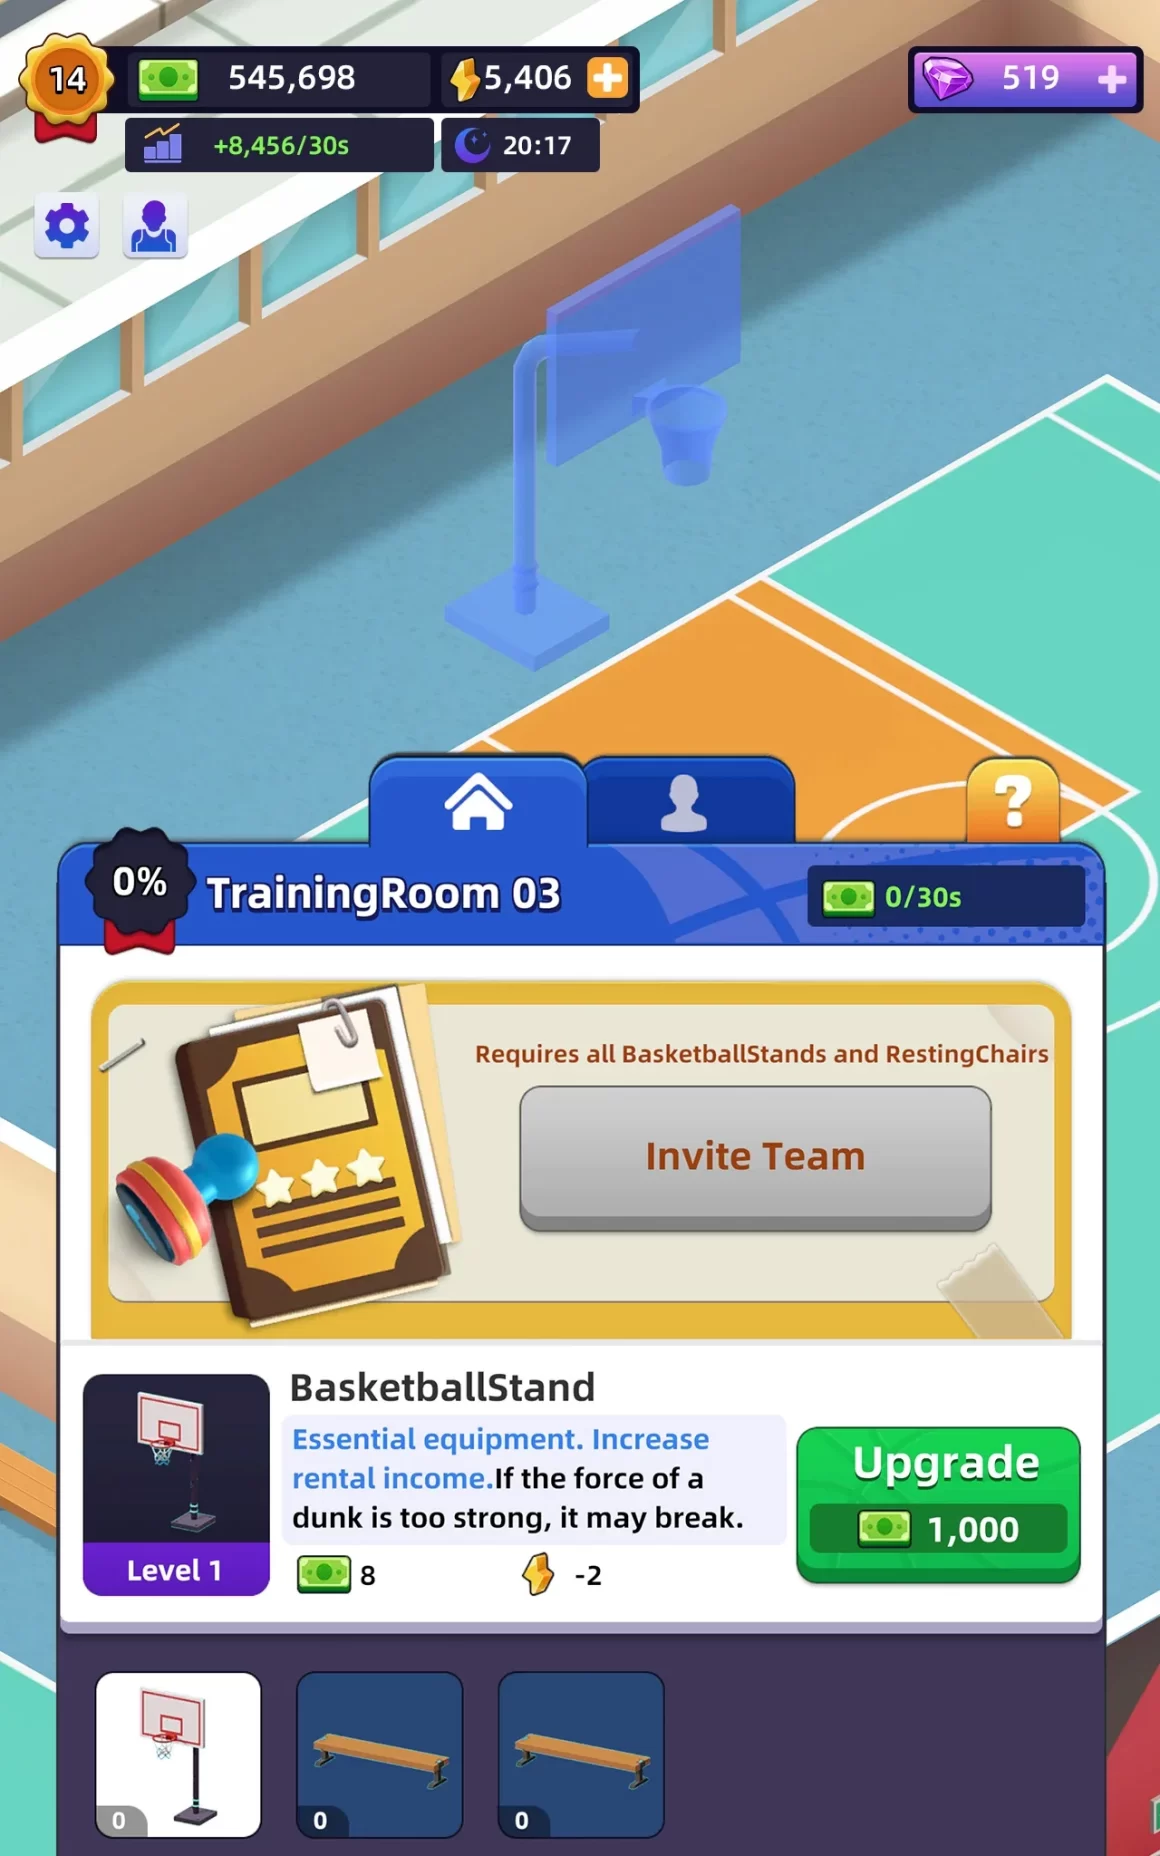 unnamed 27 4 1160x1856 - Idle Basketball Arena Tycoon Mod Apk V1.2.1 (Unlimited Money)